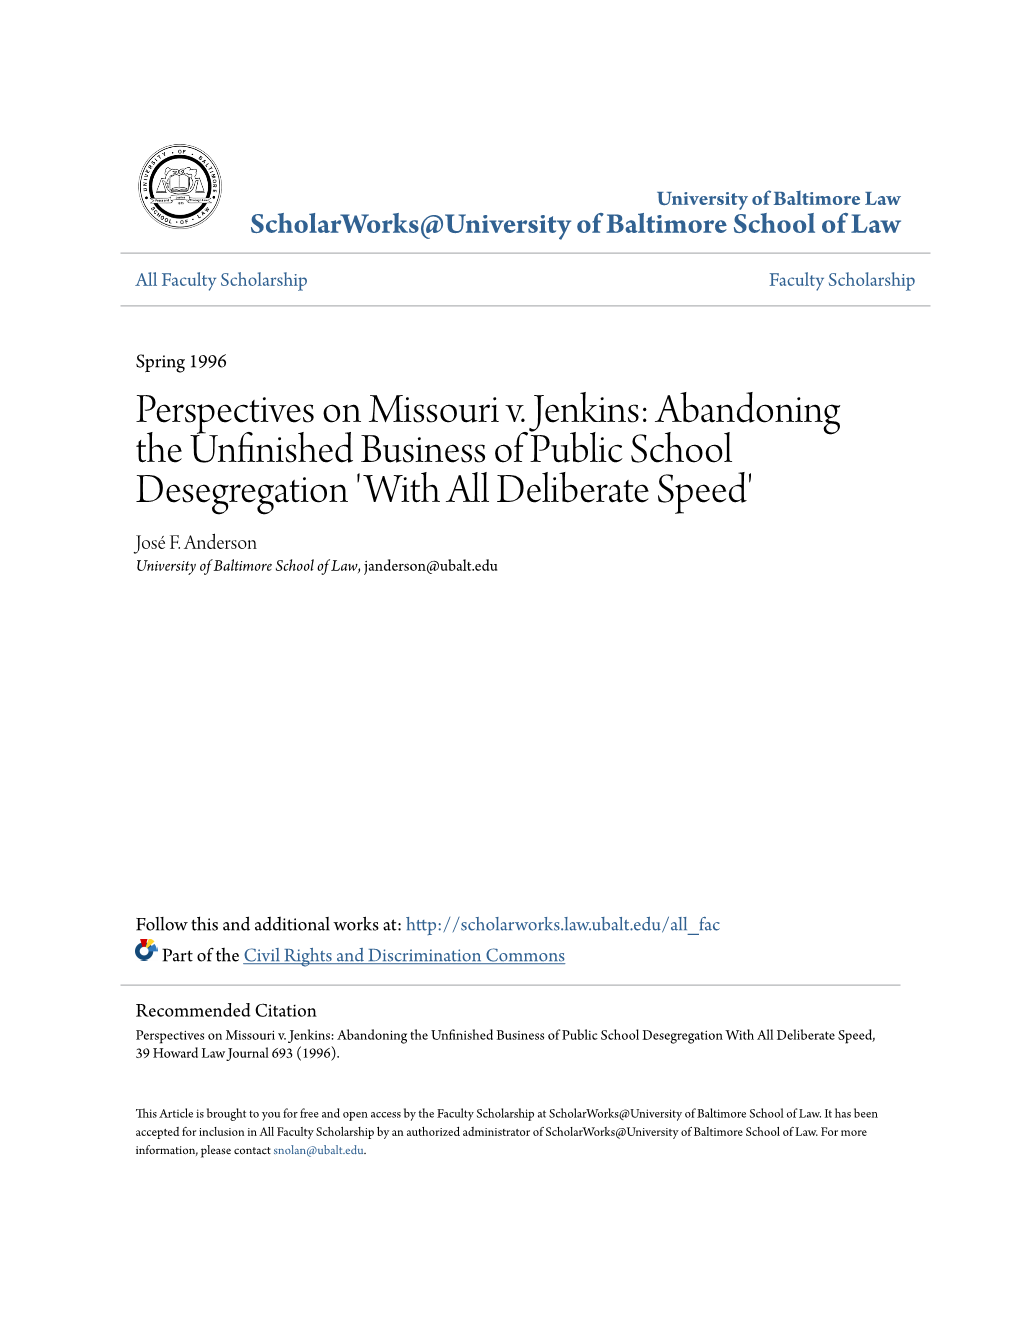 Perspectives on Missouri V. Jenkins: Abandoning the Unfinished Business of Public School Desegregation 'With All Deliberate Speed' José F